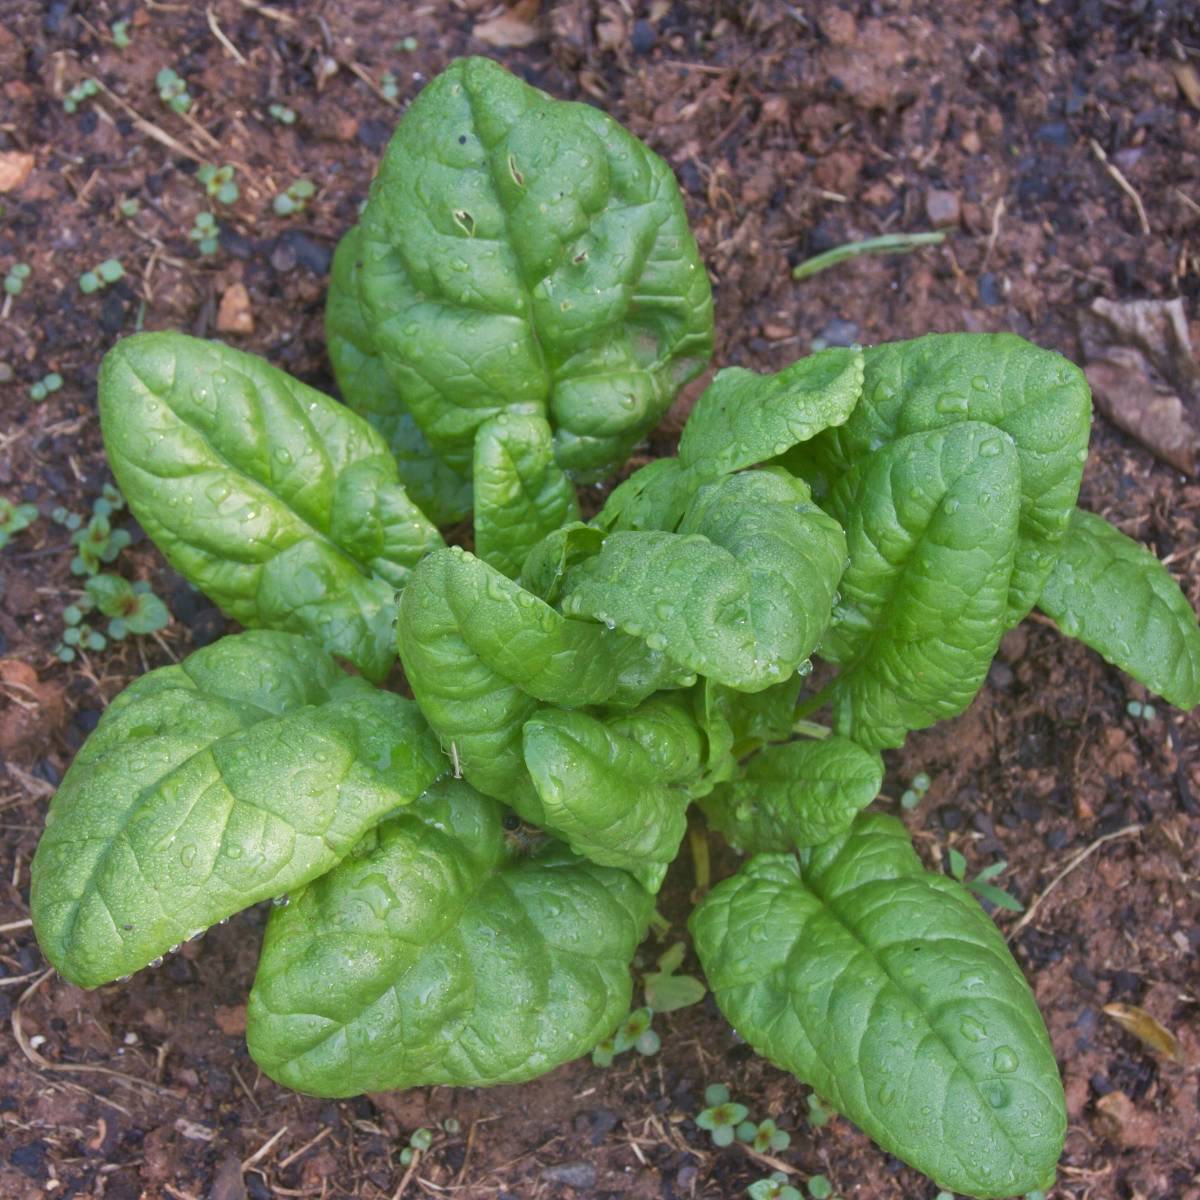 BLOOMSDALE LONG STANDING 230 seeds spinach GroCo buy US USA